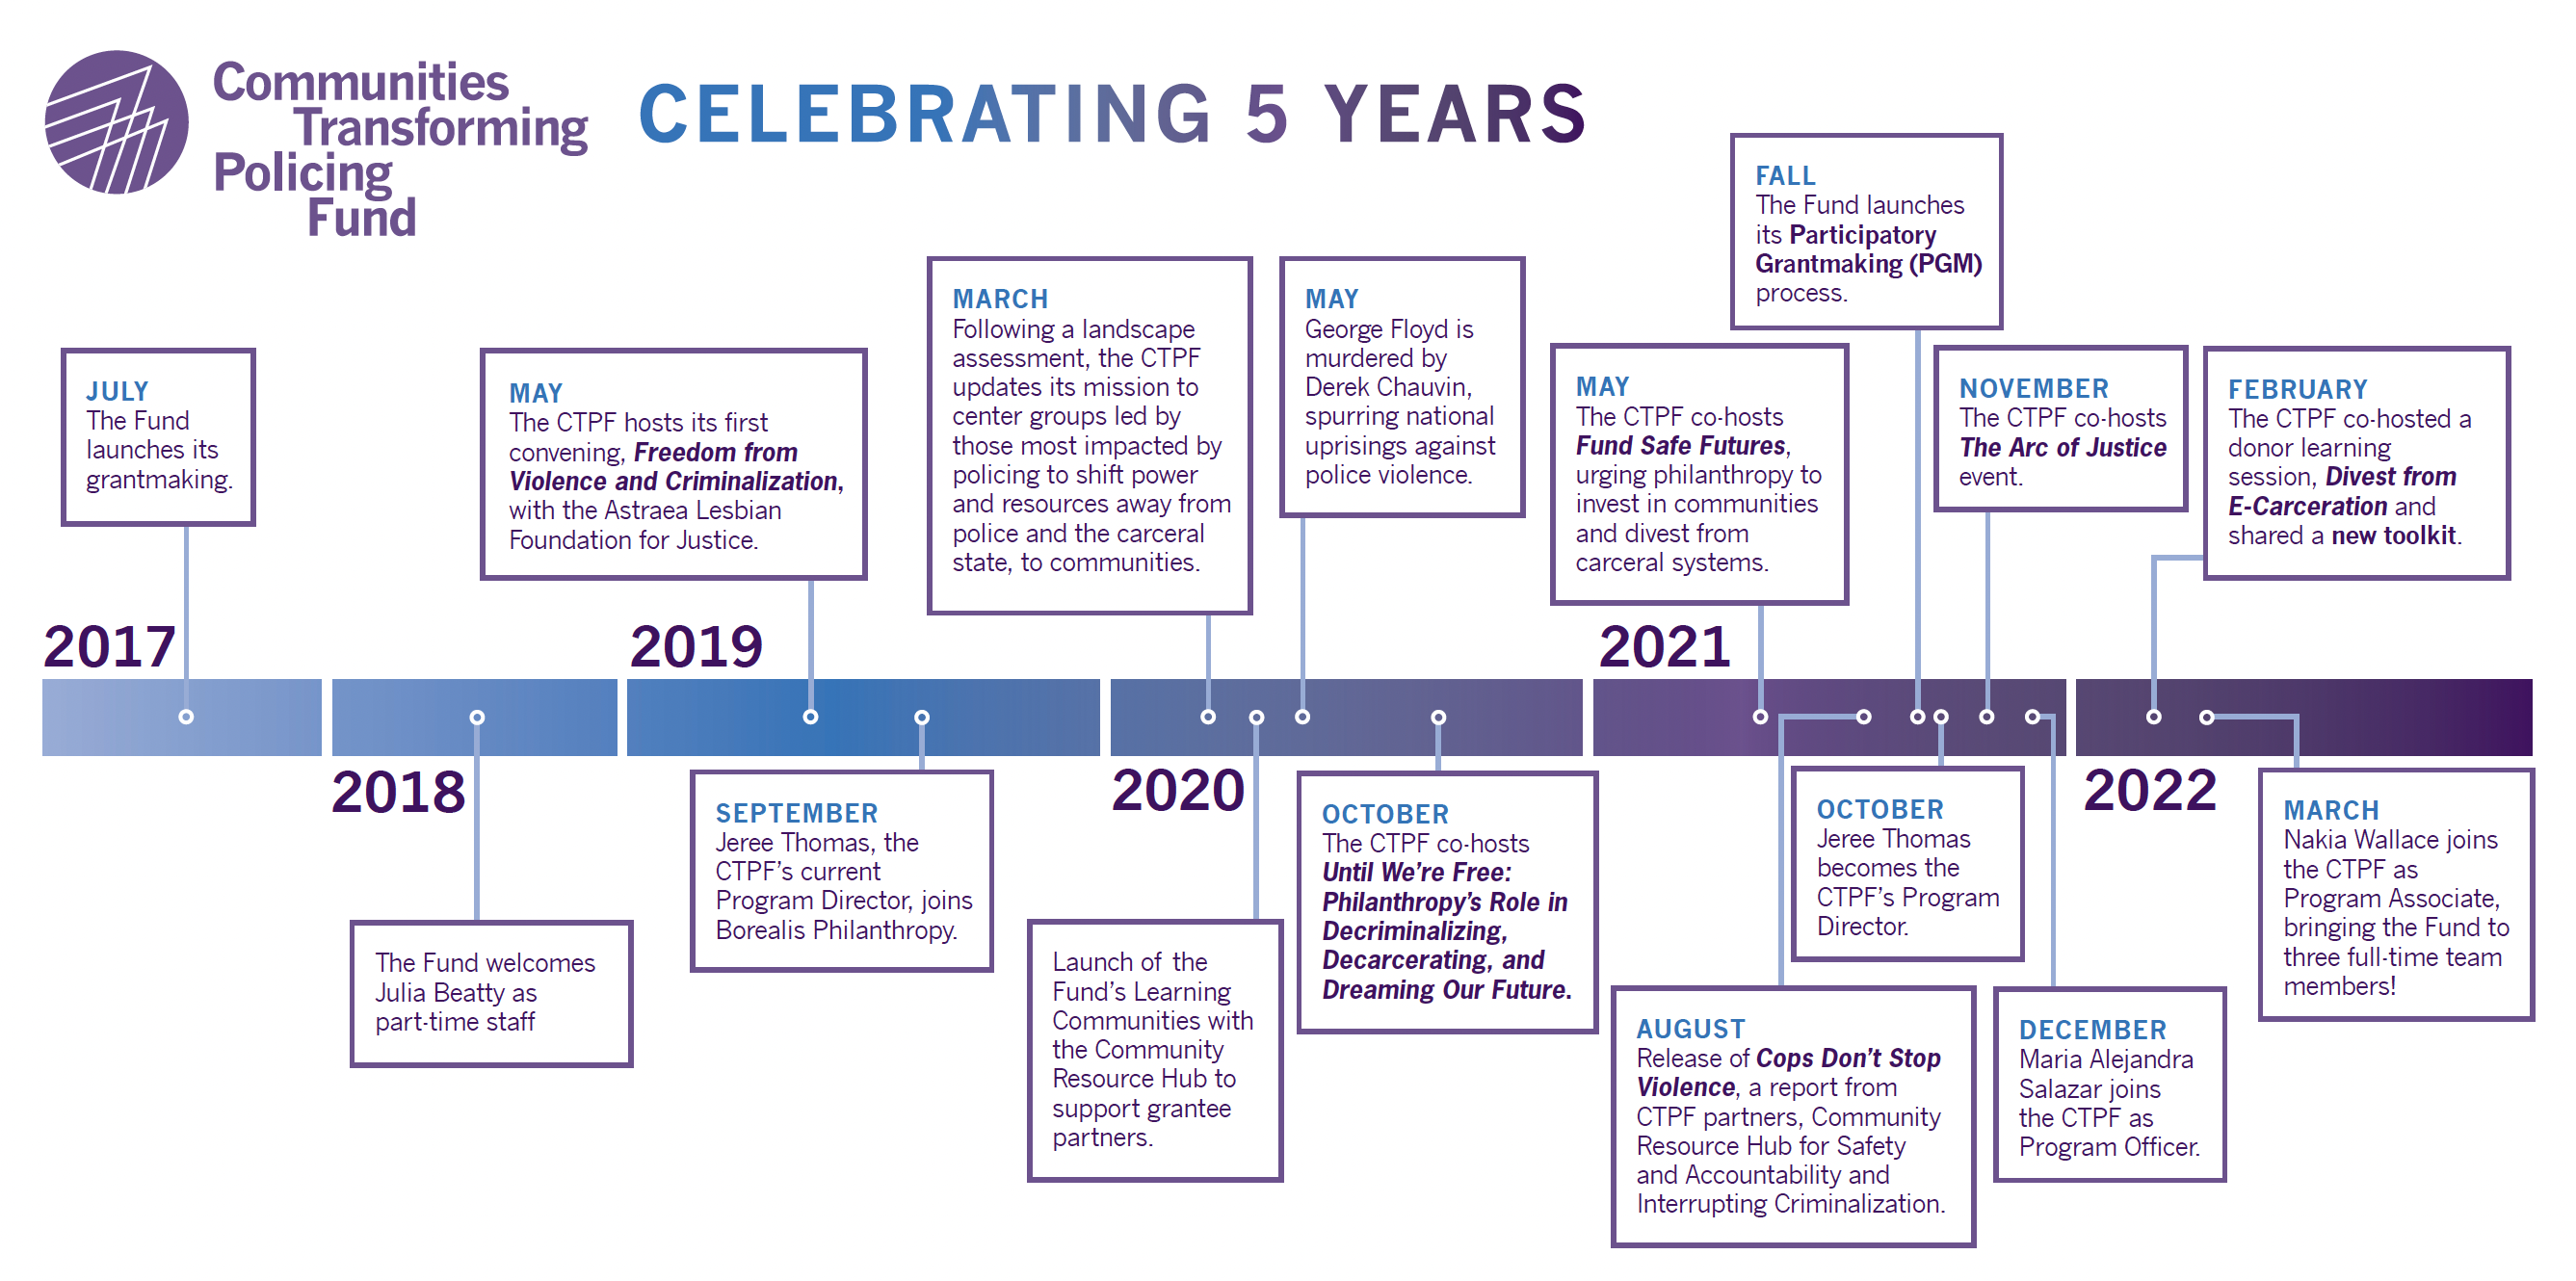 Timeline graphic. Celebrating 5 years of the Communities Transforming Policing Fund. JULY 2017: The Fund launches its grantmaking. 2018: The Fund welcomes part-time staff. MAY 2019: The CTPF hosts its first convening, Freedom from Violence and Criminalization, with the Astraea Lesbian Foundation for Justice. SEPTEMBER 2019: Jeree Thomas, the CTPF’s current Program Director, joins Borealis Philanthropy. MARCH 2020: Following a landscape assessment, the CTPF updates its mission to center groups led by those most impacted by policing to shift power and resources away from police and the carceral state, to communities. SPRING 2020: Launch of the Fund’s Learning Communities with the Community Resource Hub to support grantee partners. MAY 2020: George Floyd is murdered by Derek Chauvin, spurring national uprisings against police violence. OCTOBER 2020: The CTPF co-hosts Until We’re Free: Philanthropy’s Role in Decriminalizing, Decarcerating, and Dreaming Our Future. ARPA and Cops Not Stoping Violence.  Those were released in 2021 I believe. MAY 2021: The CTPF co-hosts Fund Safe Futures, urging philanthropy to invest in communities and divest from carceral systems. AUGUST 2021: Release of Cops Don’t Stop Violence, a report from CTPF partners, Community Resource Hub for Safety and Accountability and Interrupting Criminalization. FALL: The Fund launches its Participatory Grantmaking (PGM) process. OCTOBER 2021: Jeree Thomas becomes the CTPF’s Program Director. NOVEMBER 2021: The CTPF co-hosts The Arc of Justice event. DECEMBER 2021: Maria Alejandra Salazar joins the CTPF as Program Officer. FEBRUARY 2022: The CTPF co-hosted a donor learning session, Divest from E-Carceration and shared a new toolkit. MARCH 2022: Nakia Wallace joins the CTPF as Program Associate, bringing the Fund to three full-time team members!